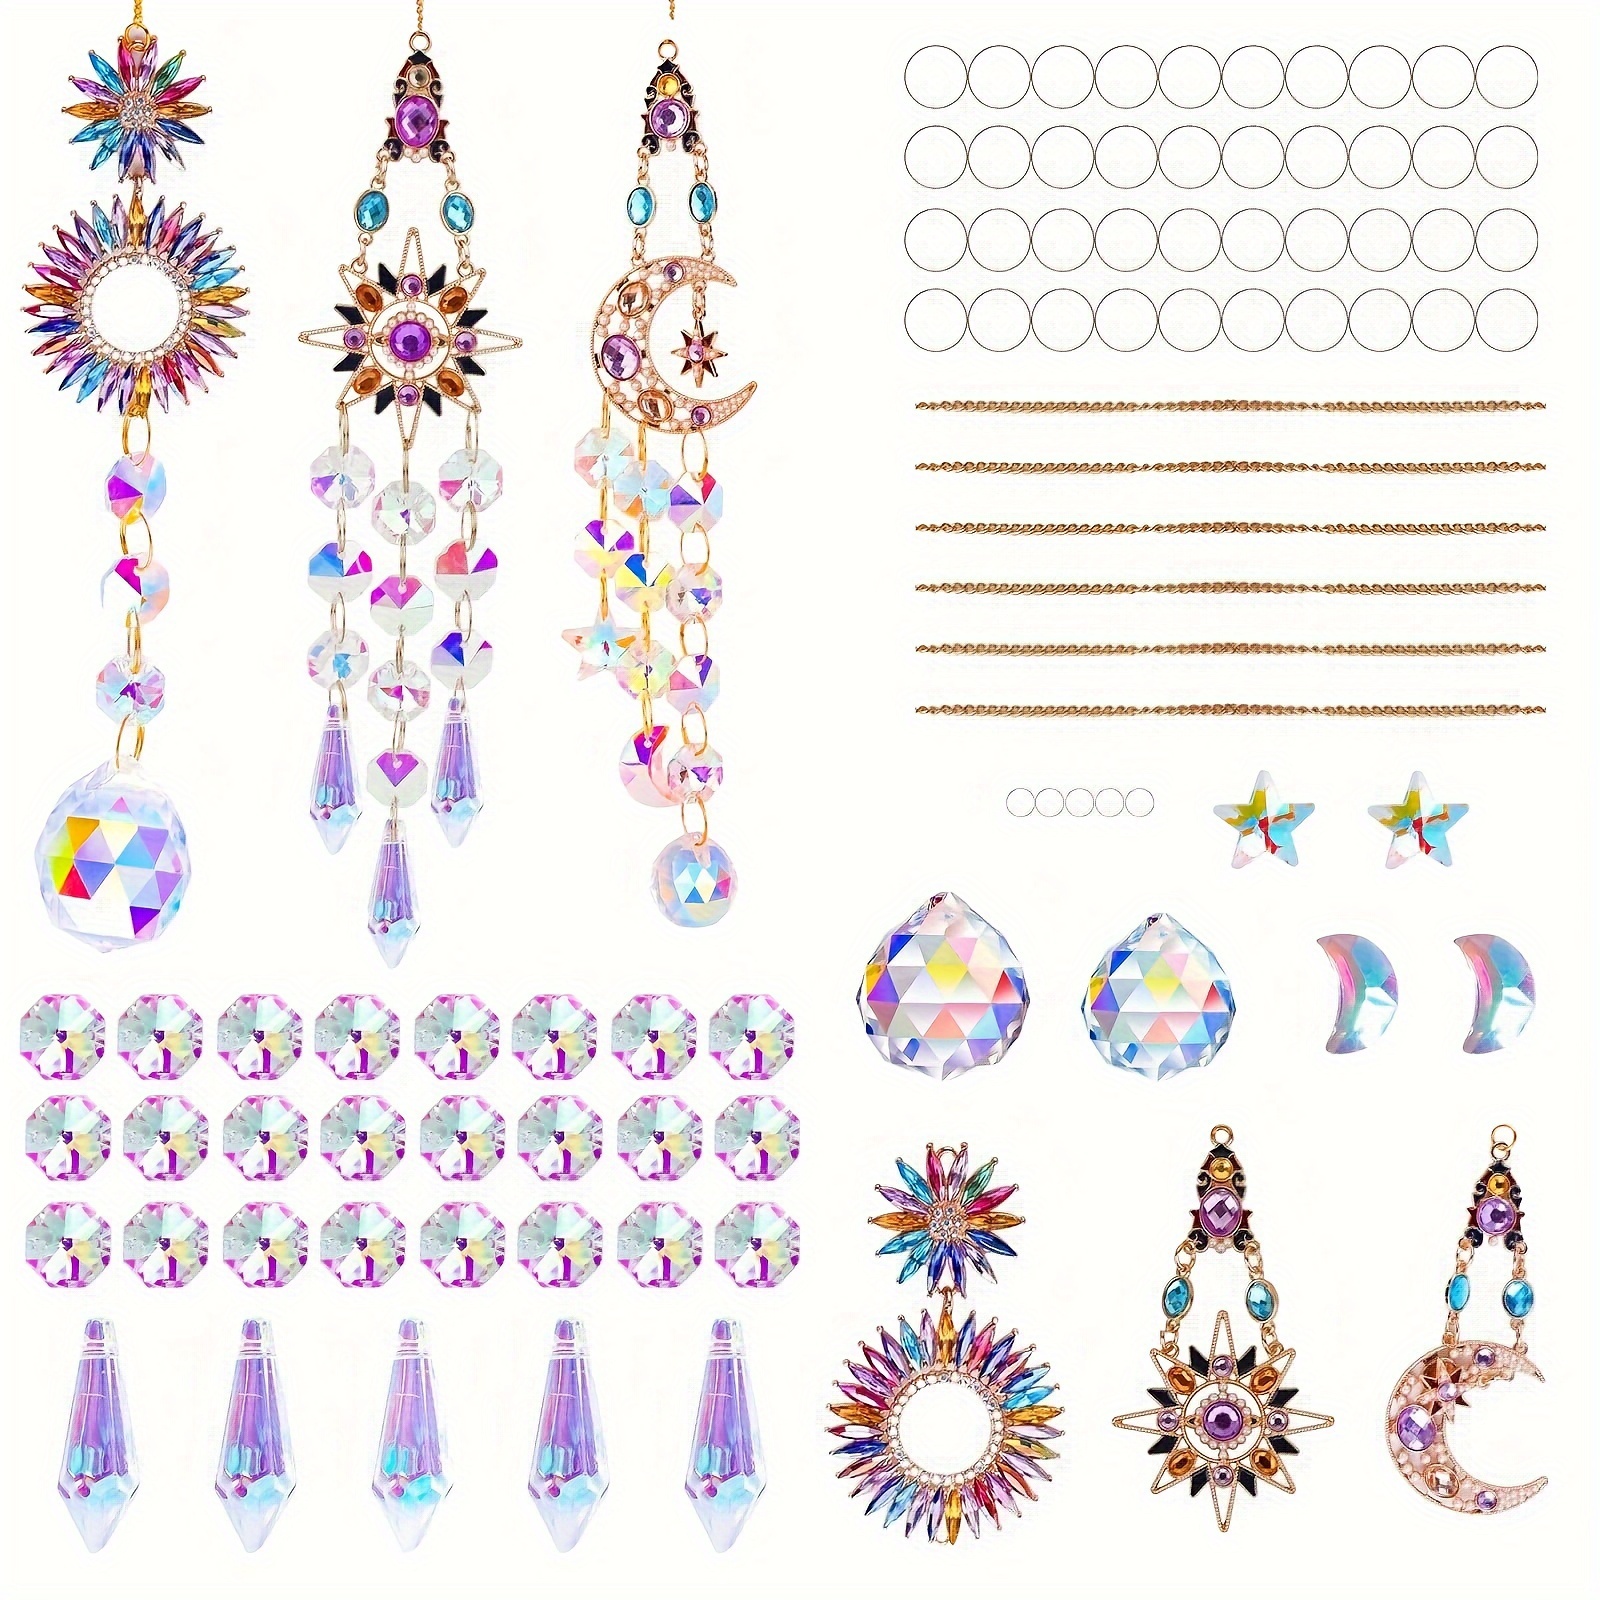 

Rainbow Maker Crystal Suncatcher Kit - Colorful Diy Craft Set With Pendants For Adults, Glass Material